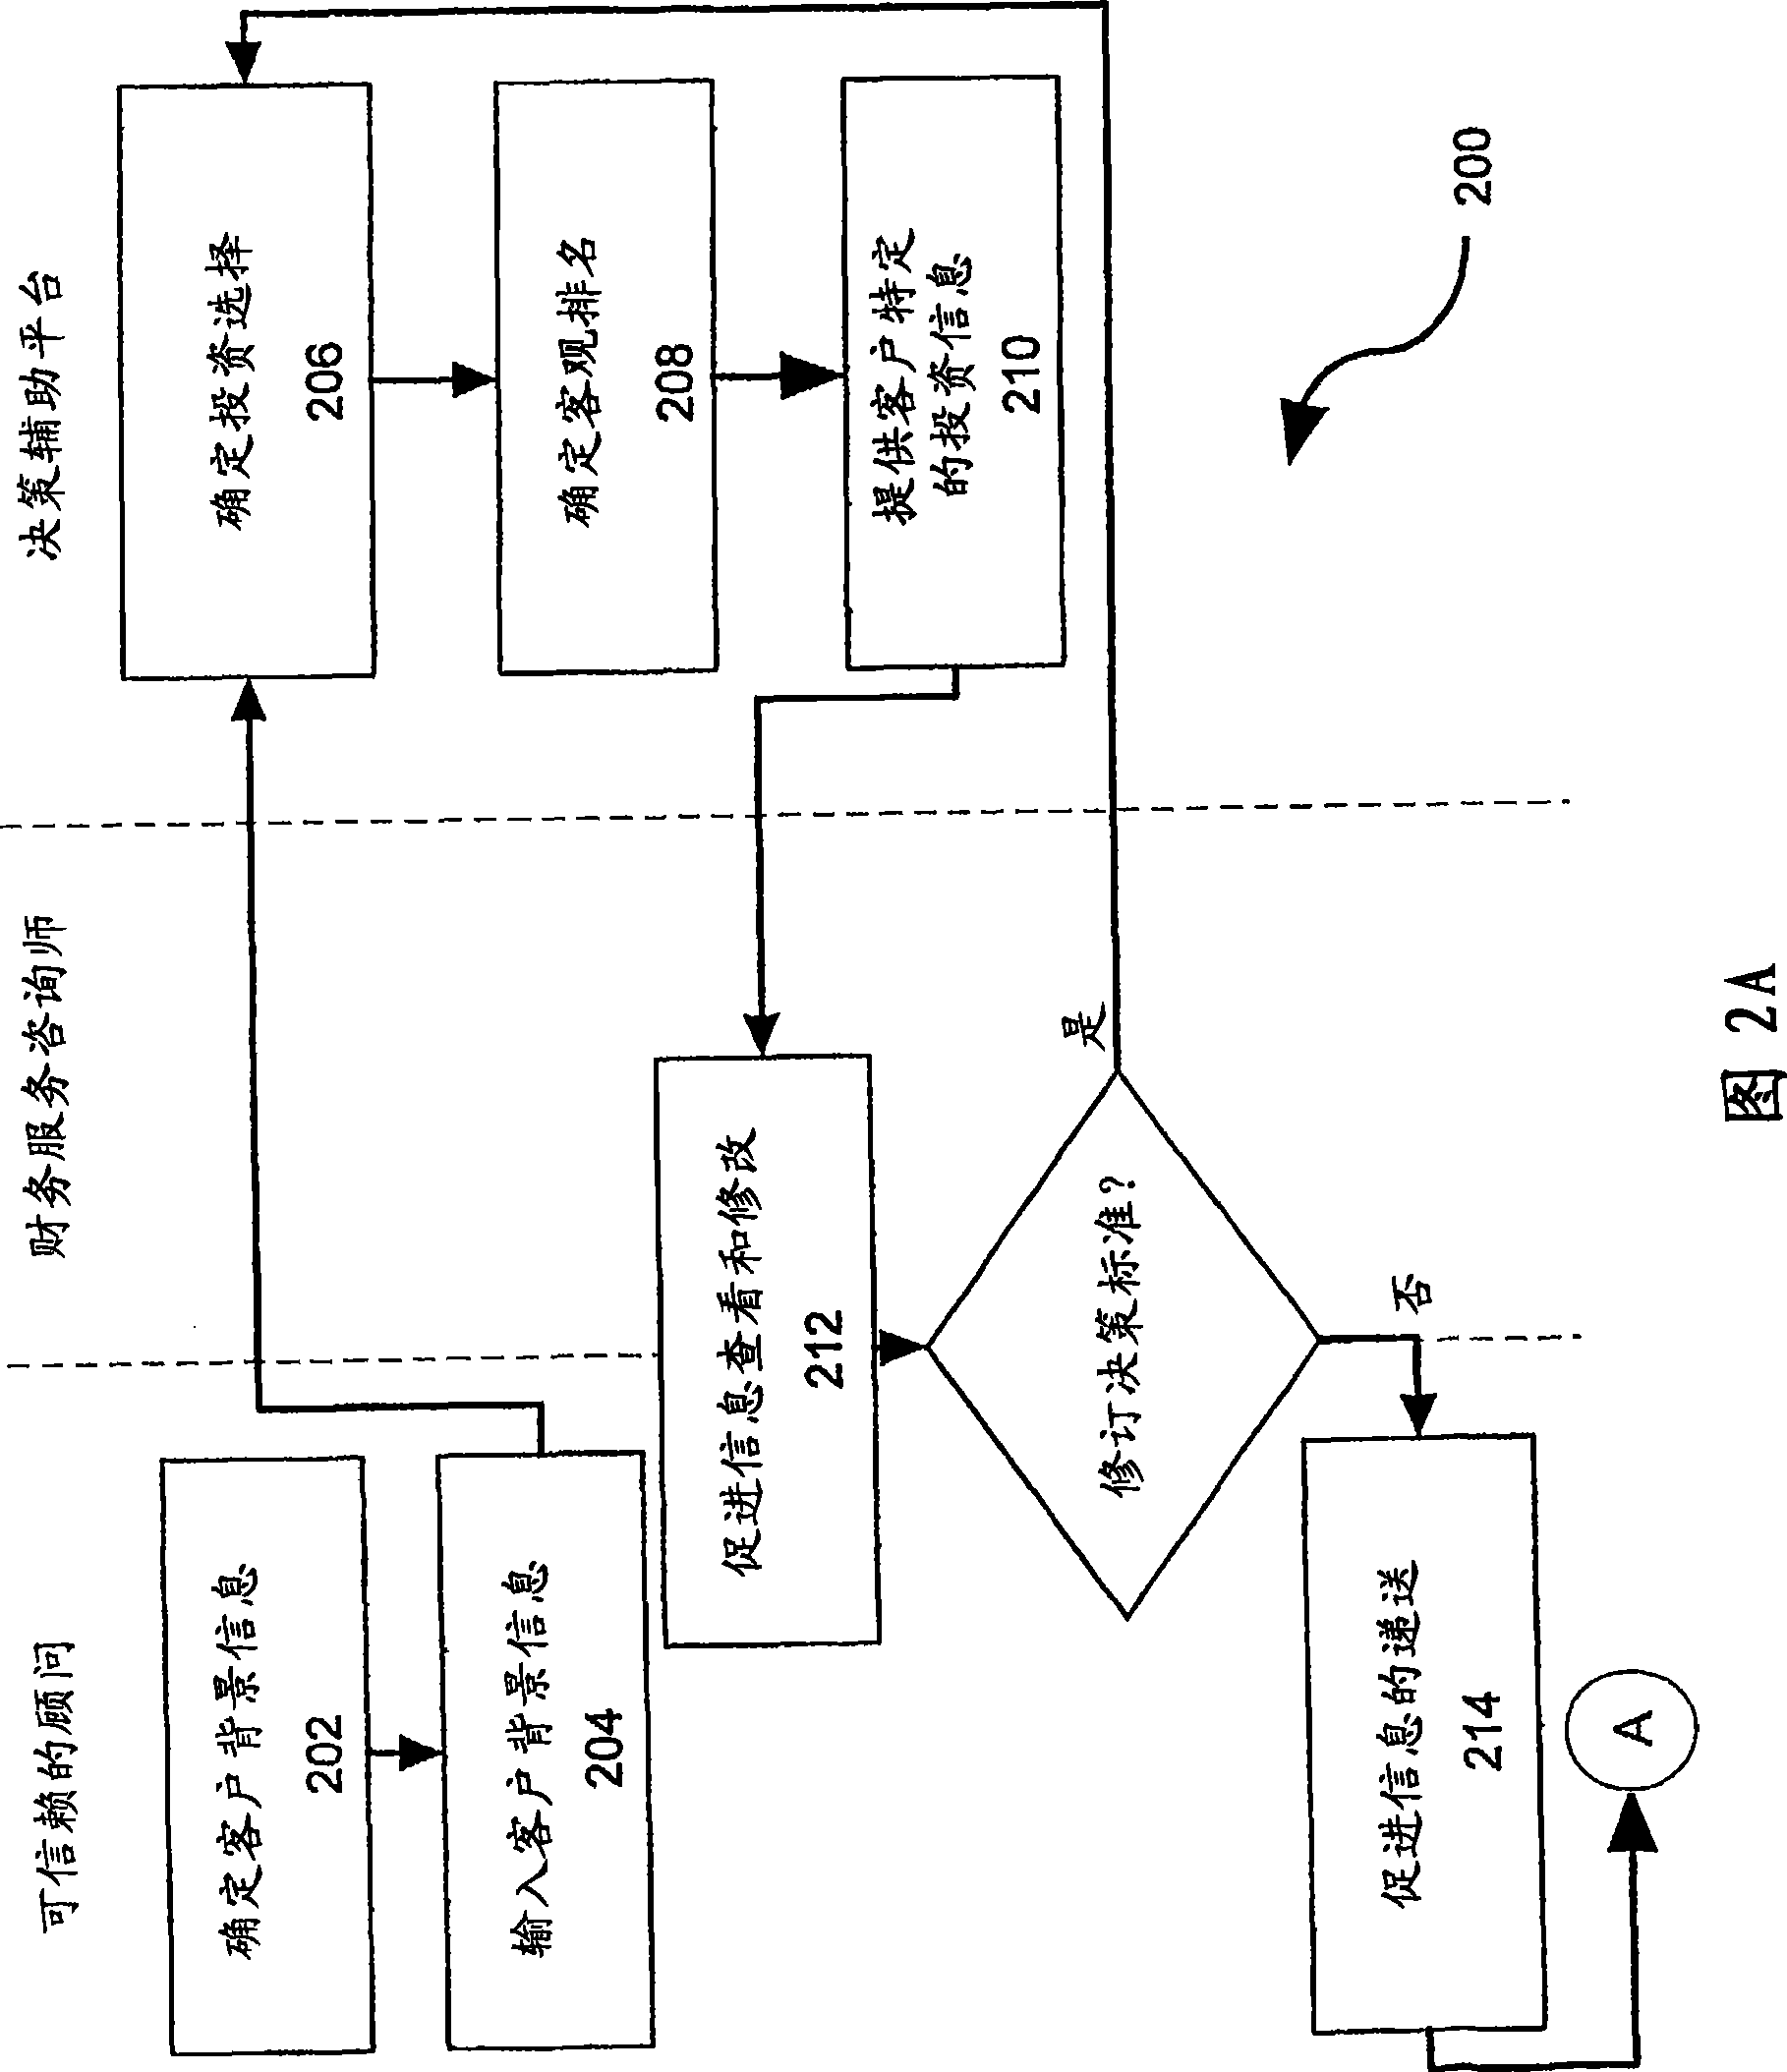 Configuring system and method for accelerating financial analysis